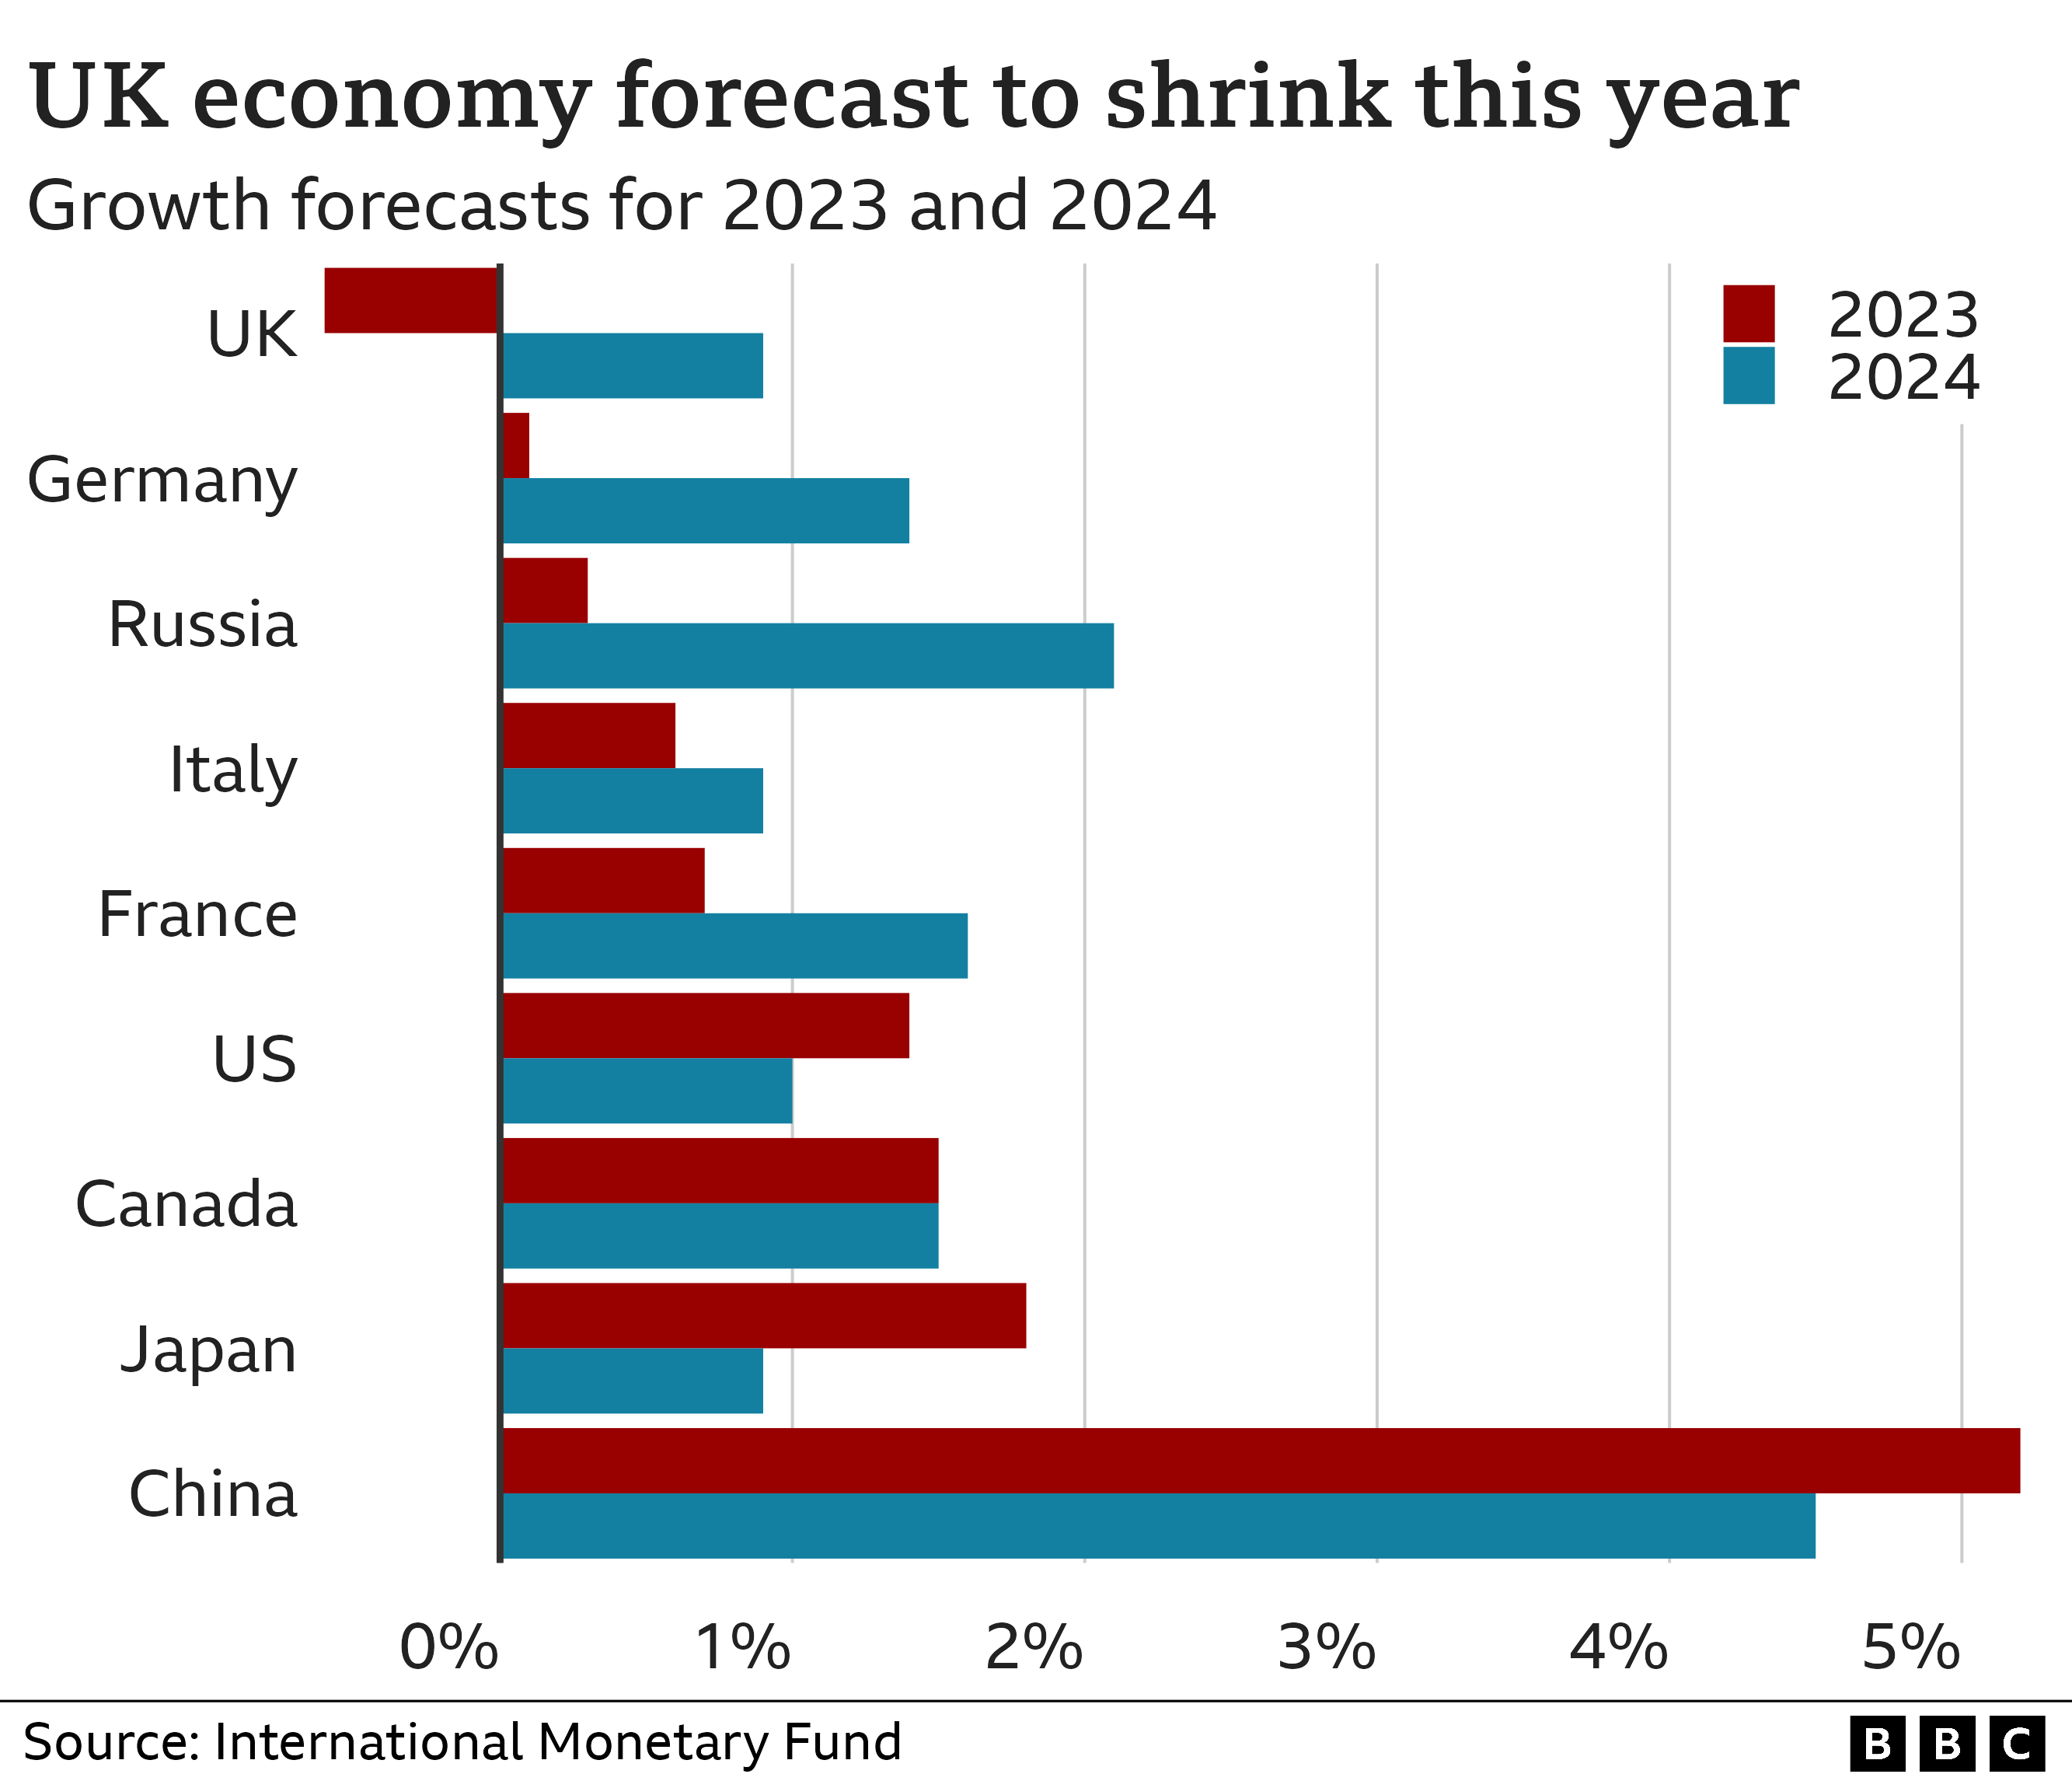 UK expected to be only major economy to shrink in 2023 - IMF